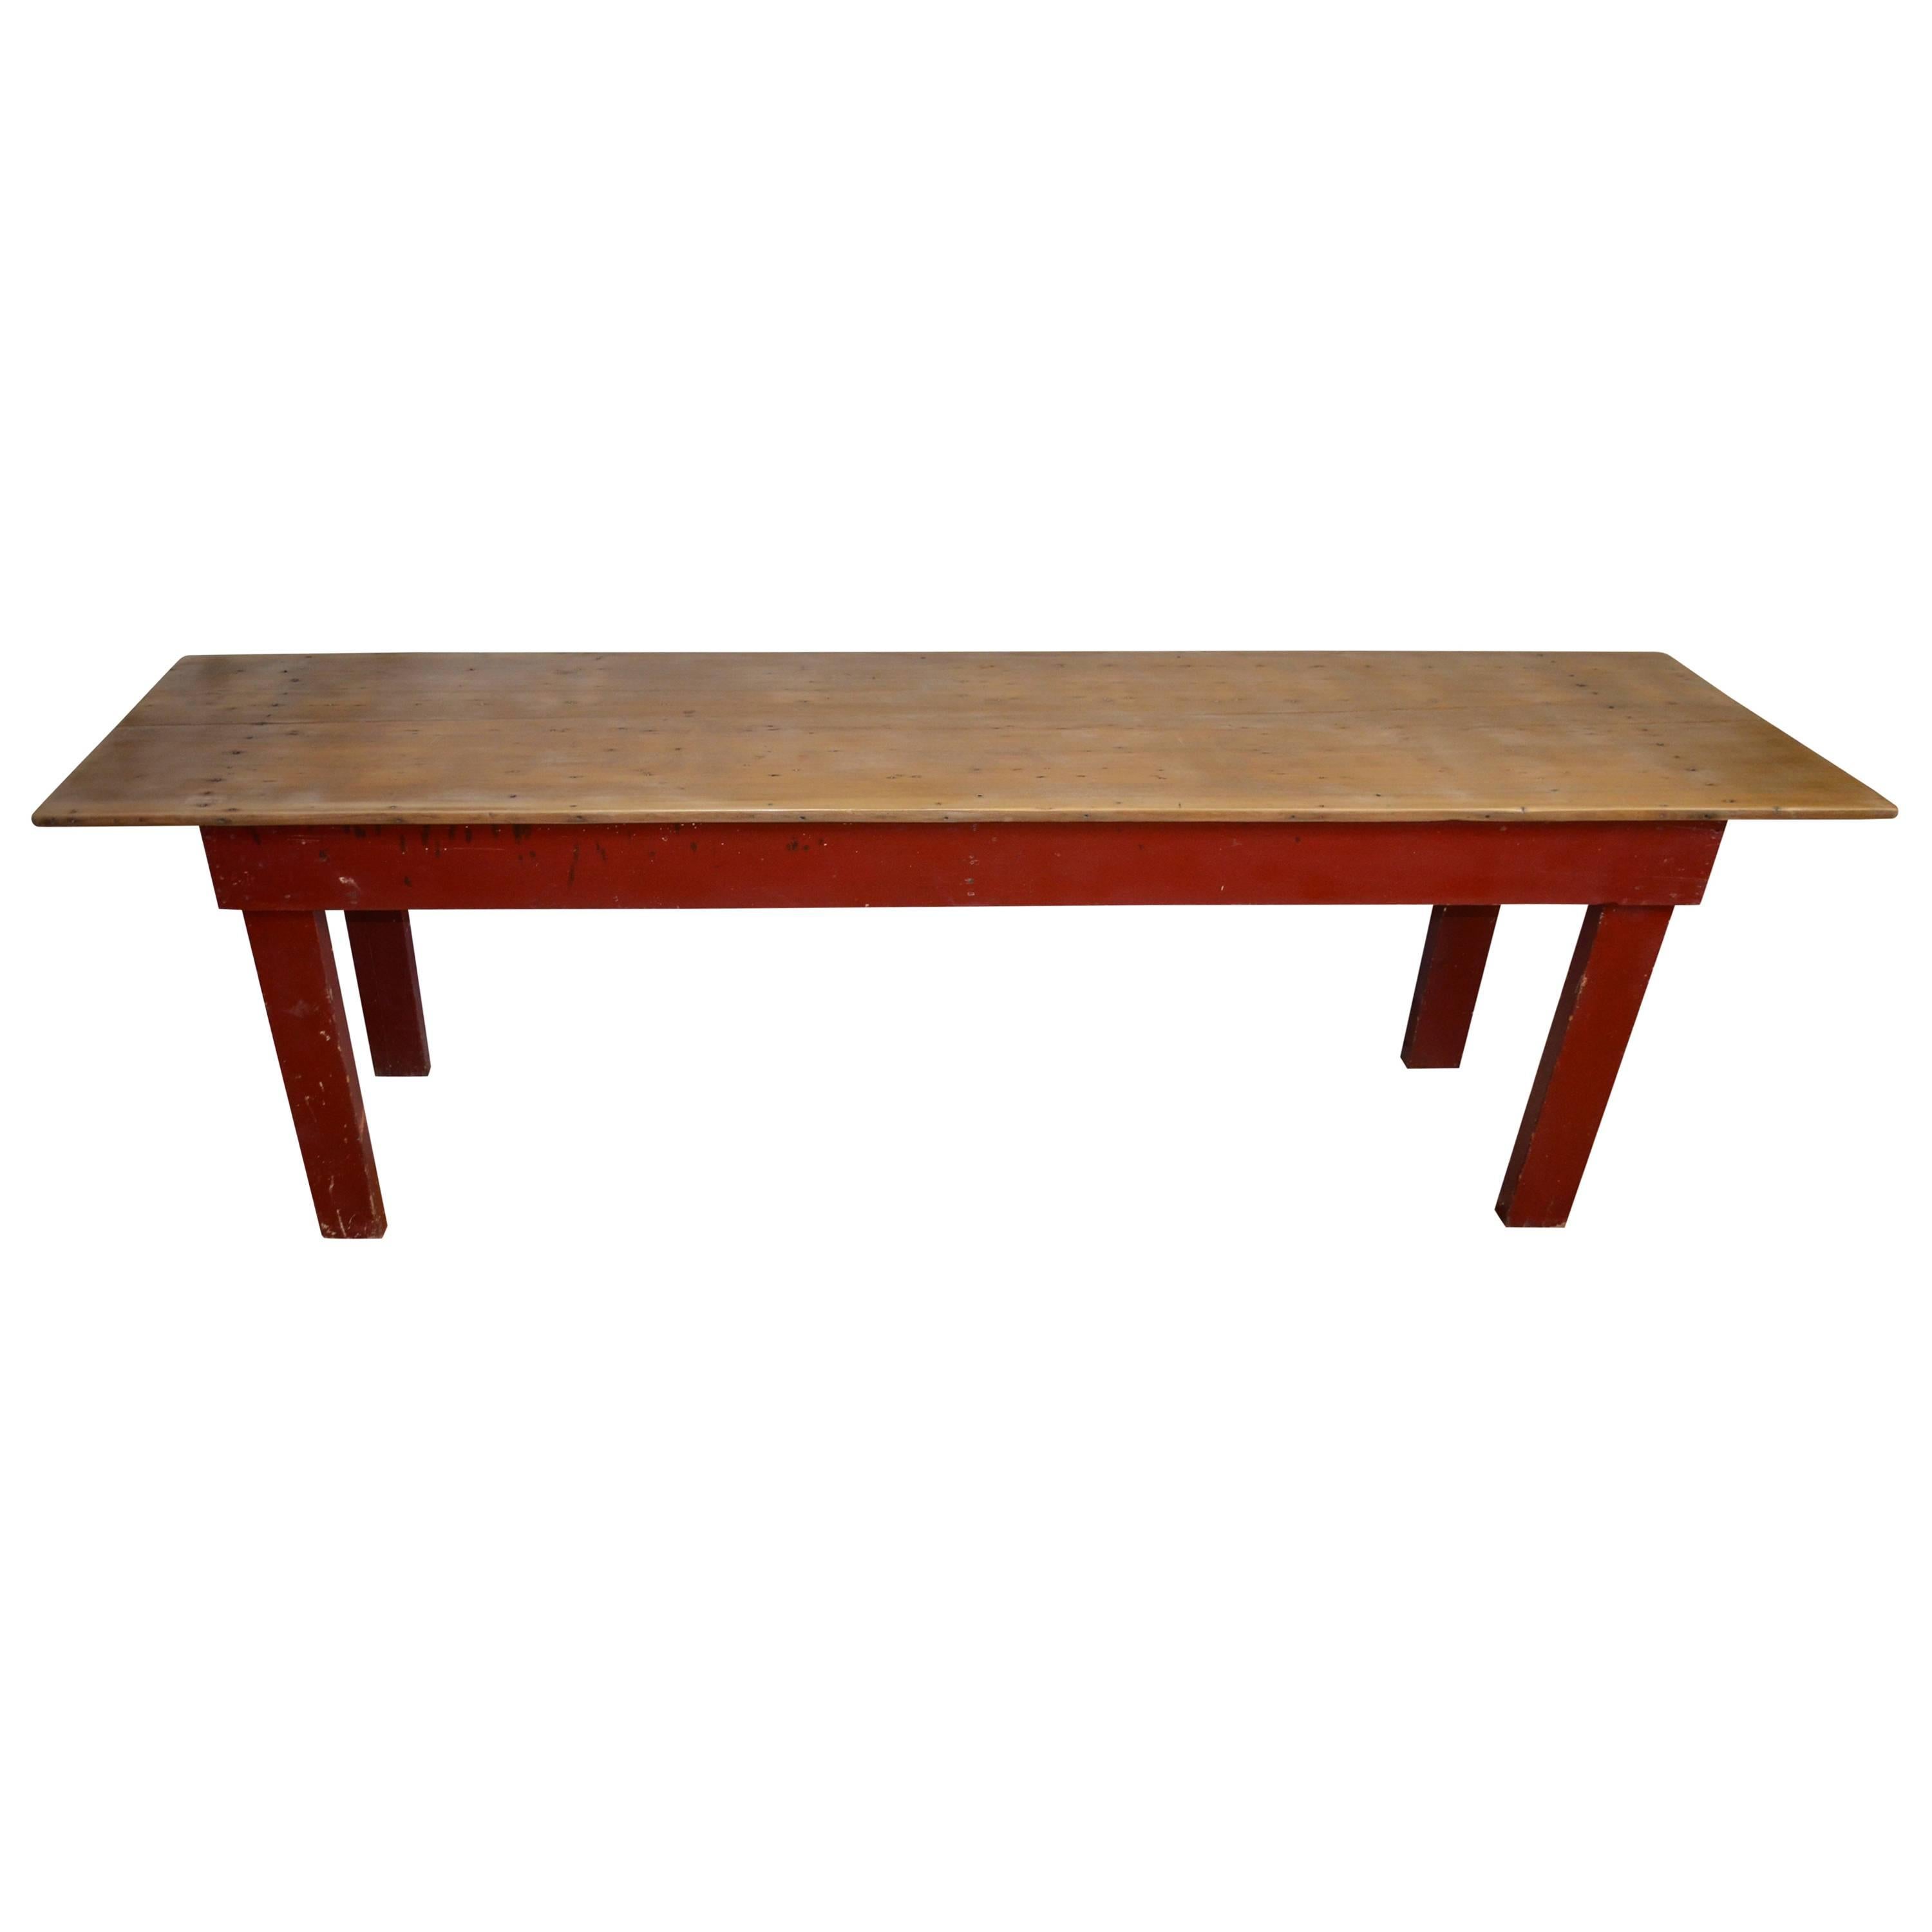 Farm Table with Single Board Top, Red Legs and Stringer Boards